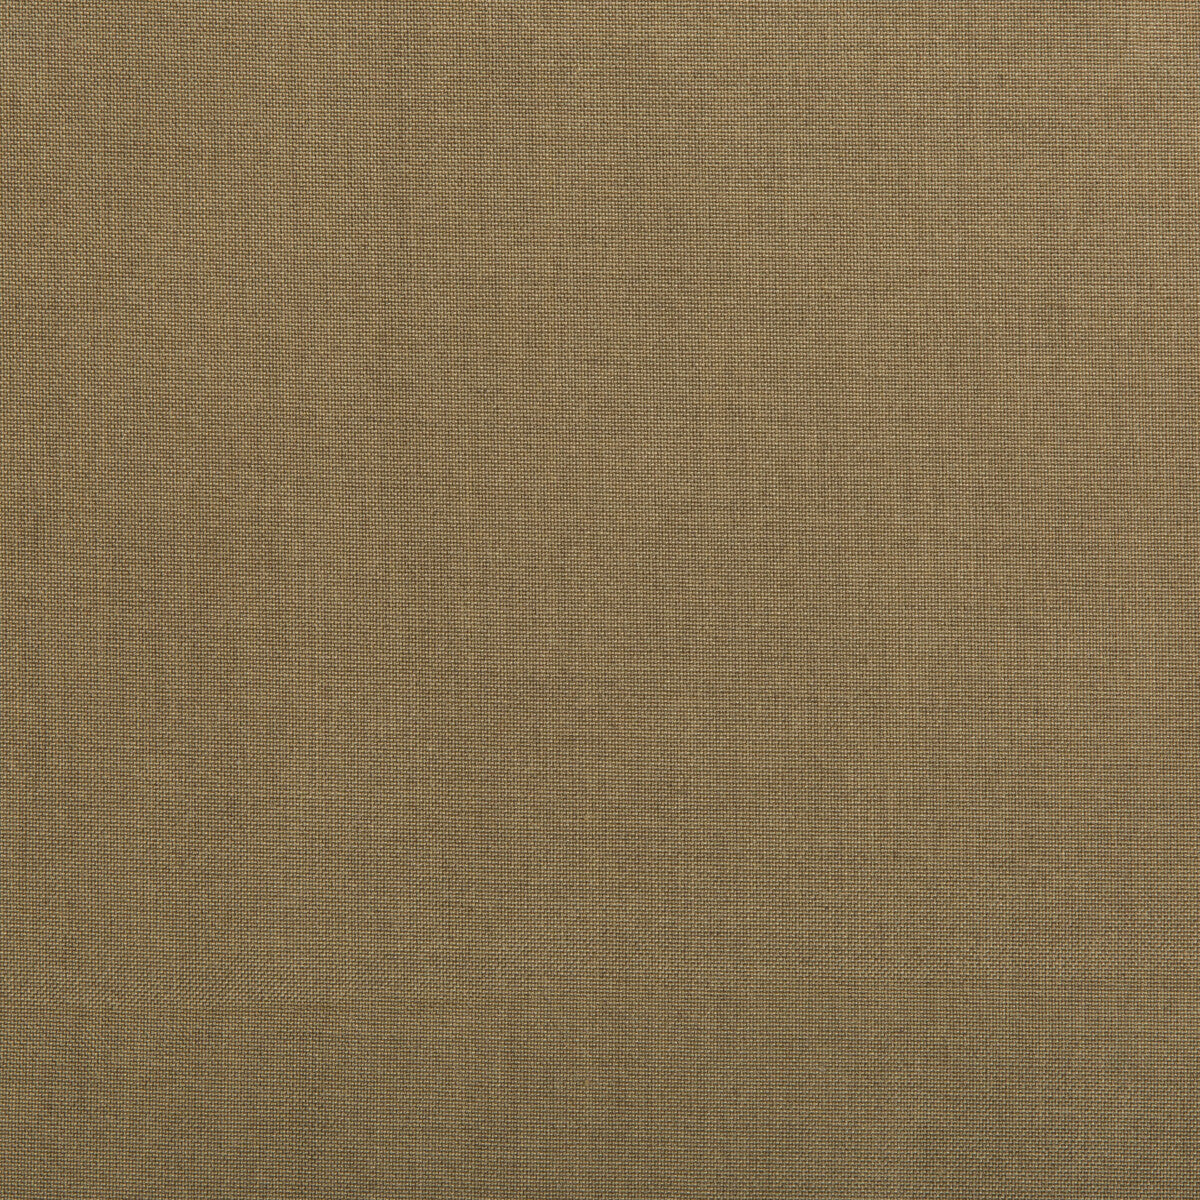 Kf Bas fabric - pattern 35372.106.0 - by Kravet Basics in the Performance Indoor Outdoor collection